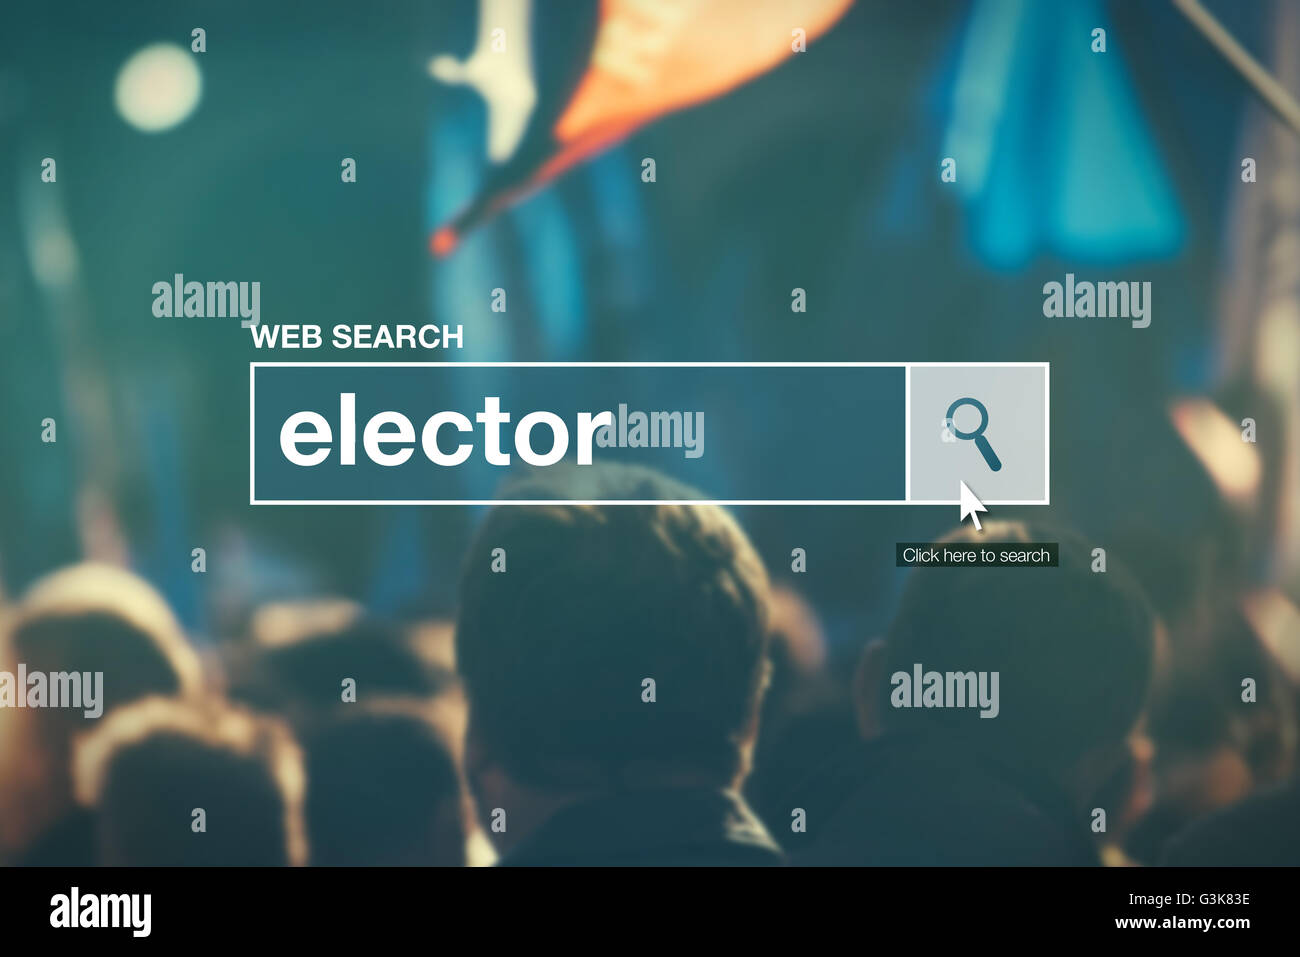 Elector - web search bar glossary term in internet glossary. Stock Photo